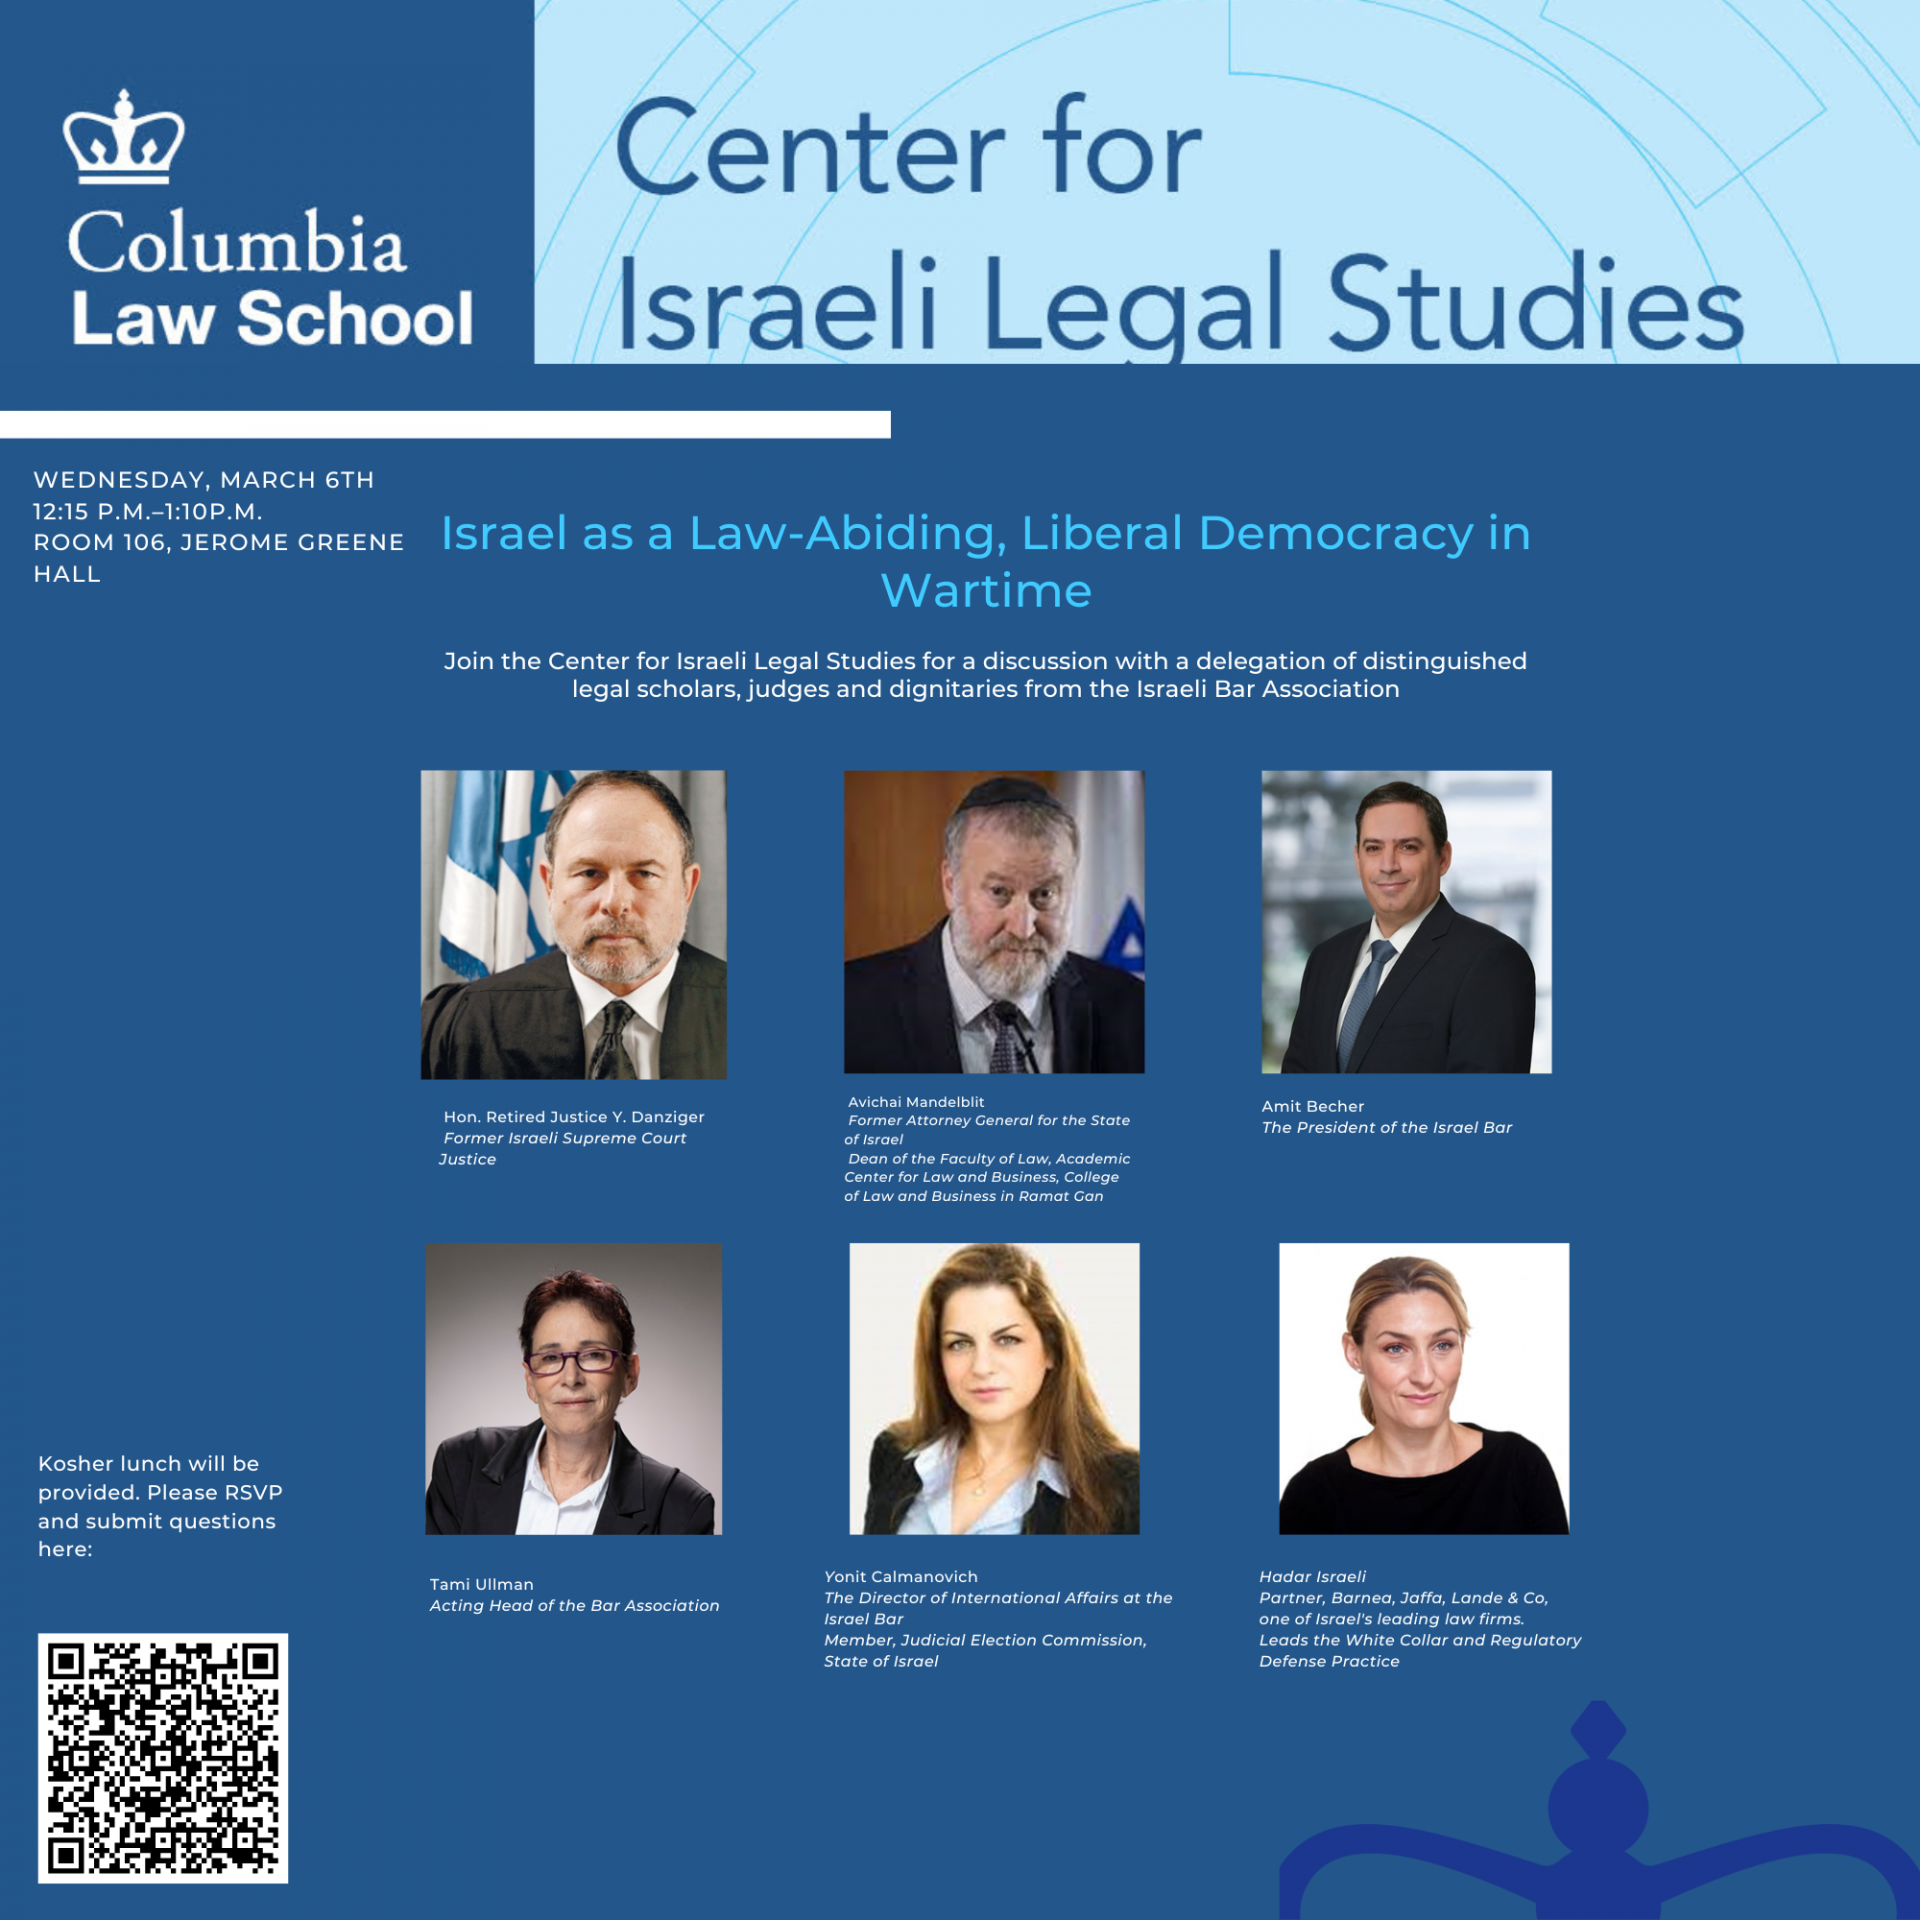 Israel as a Law-Abiding, Liberal Democracy in Wartime